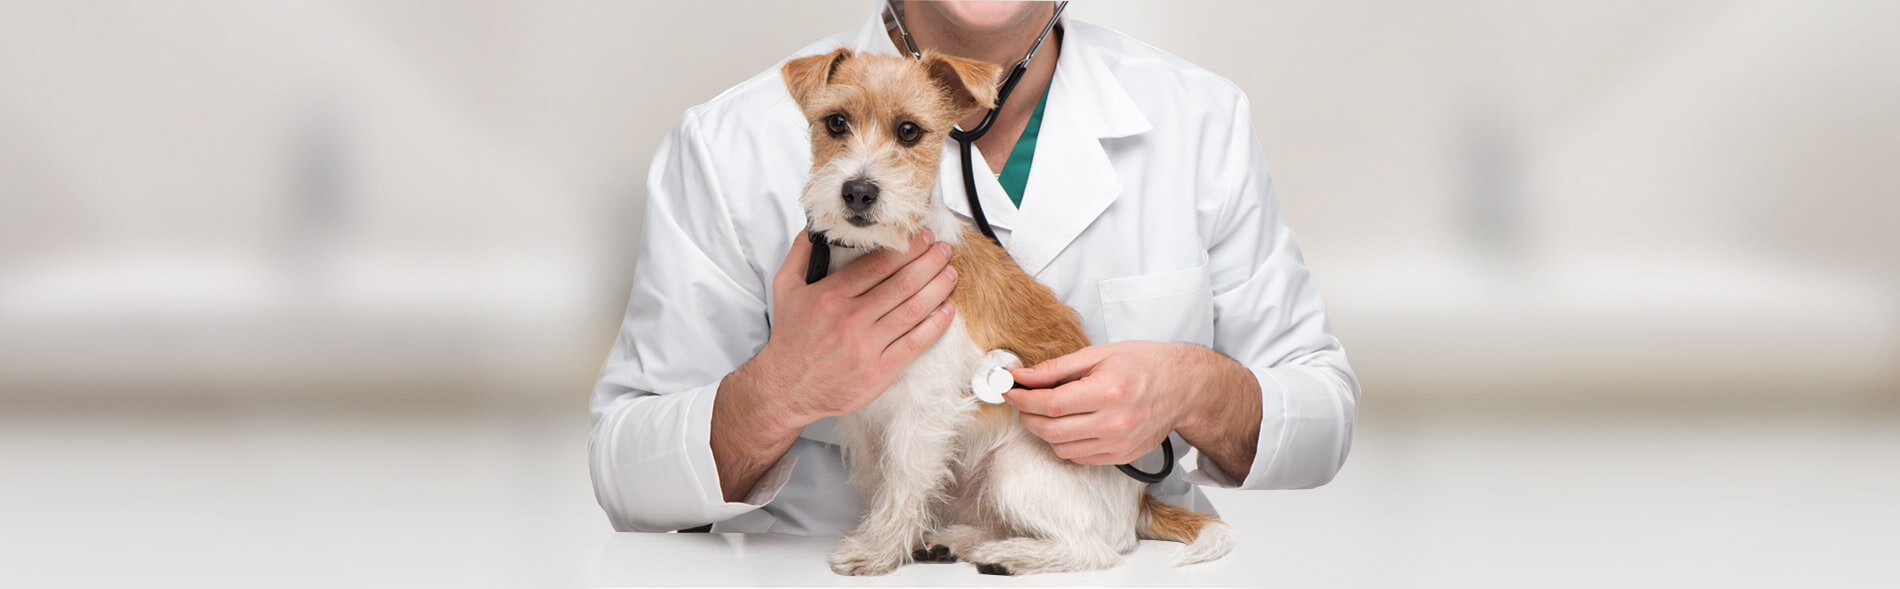 Doctor Holding a Dog